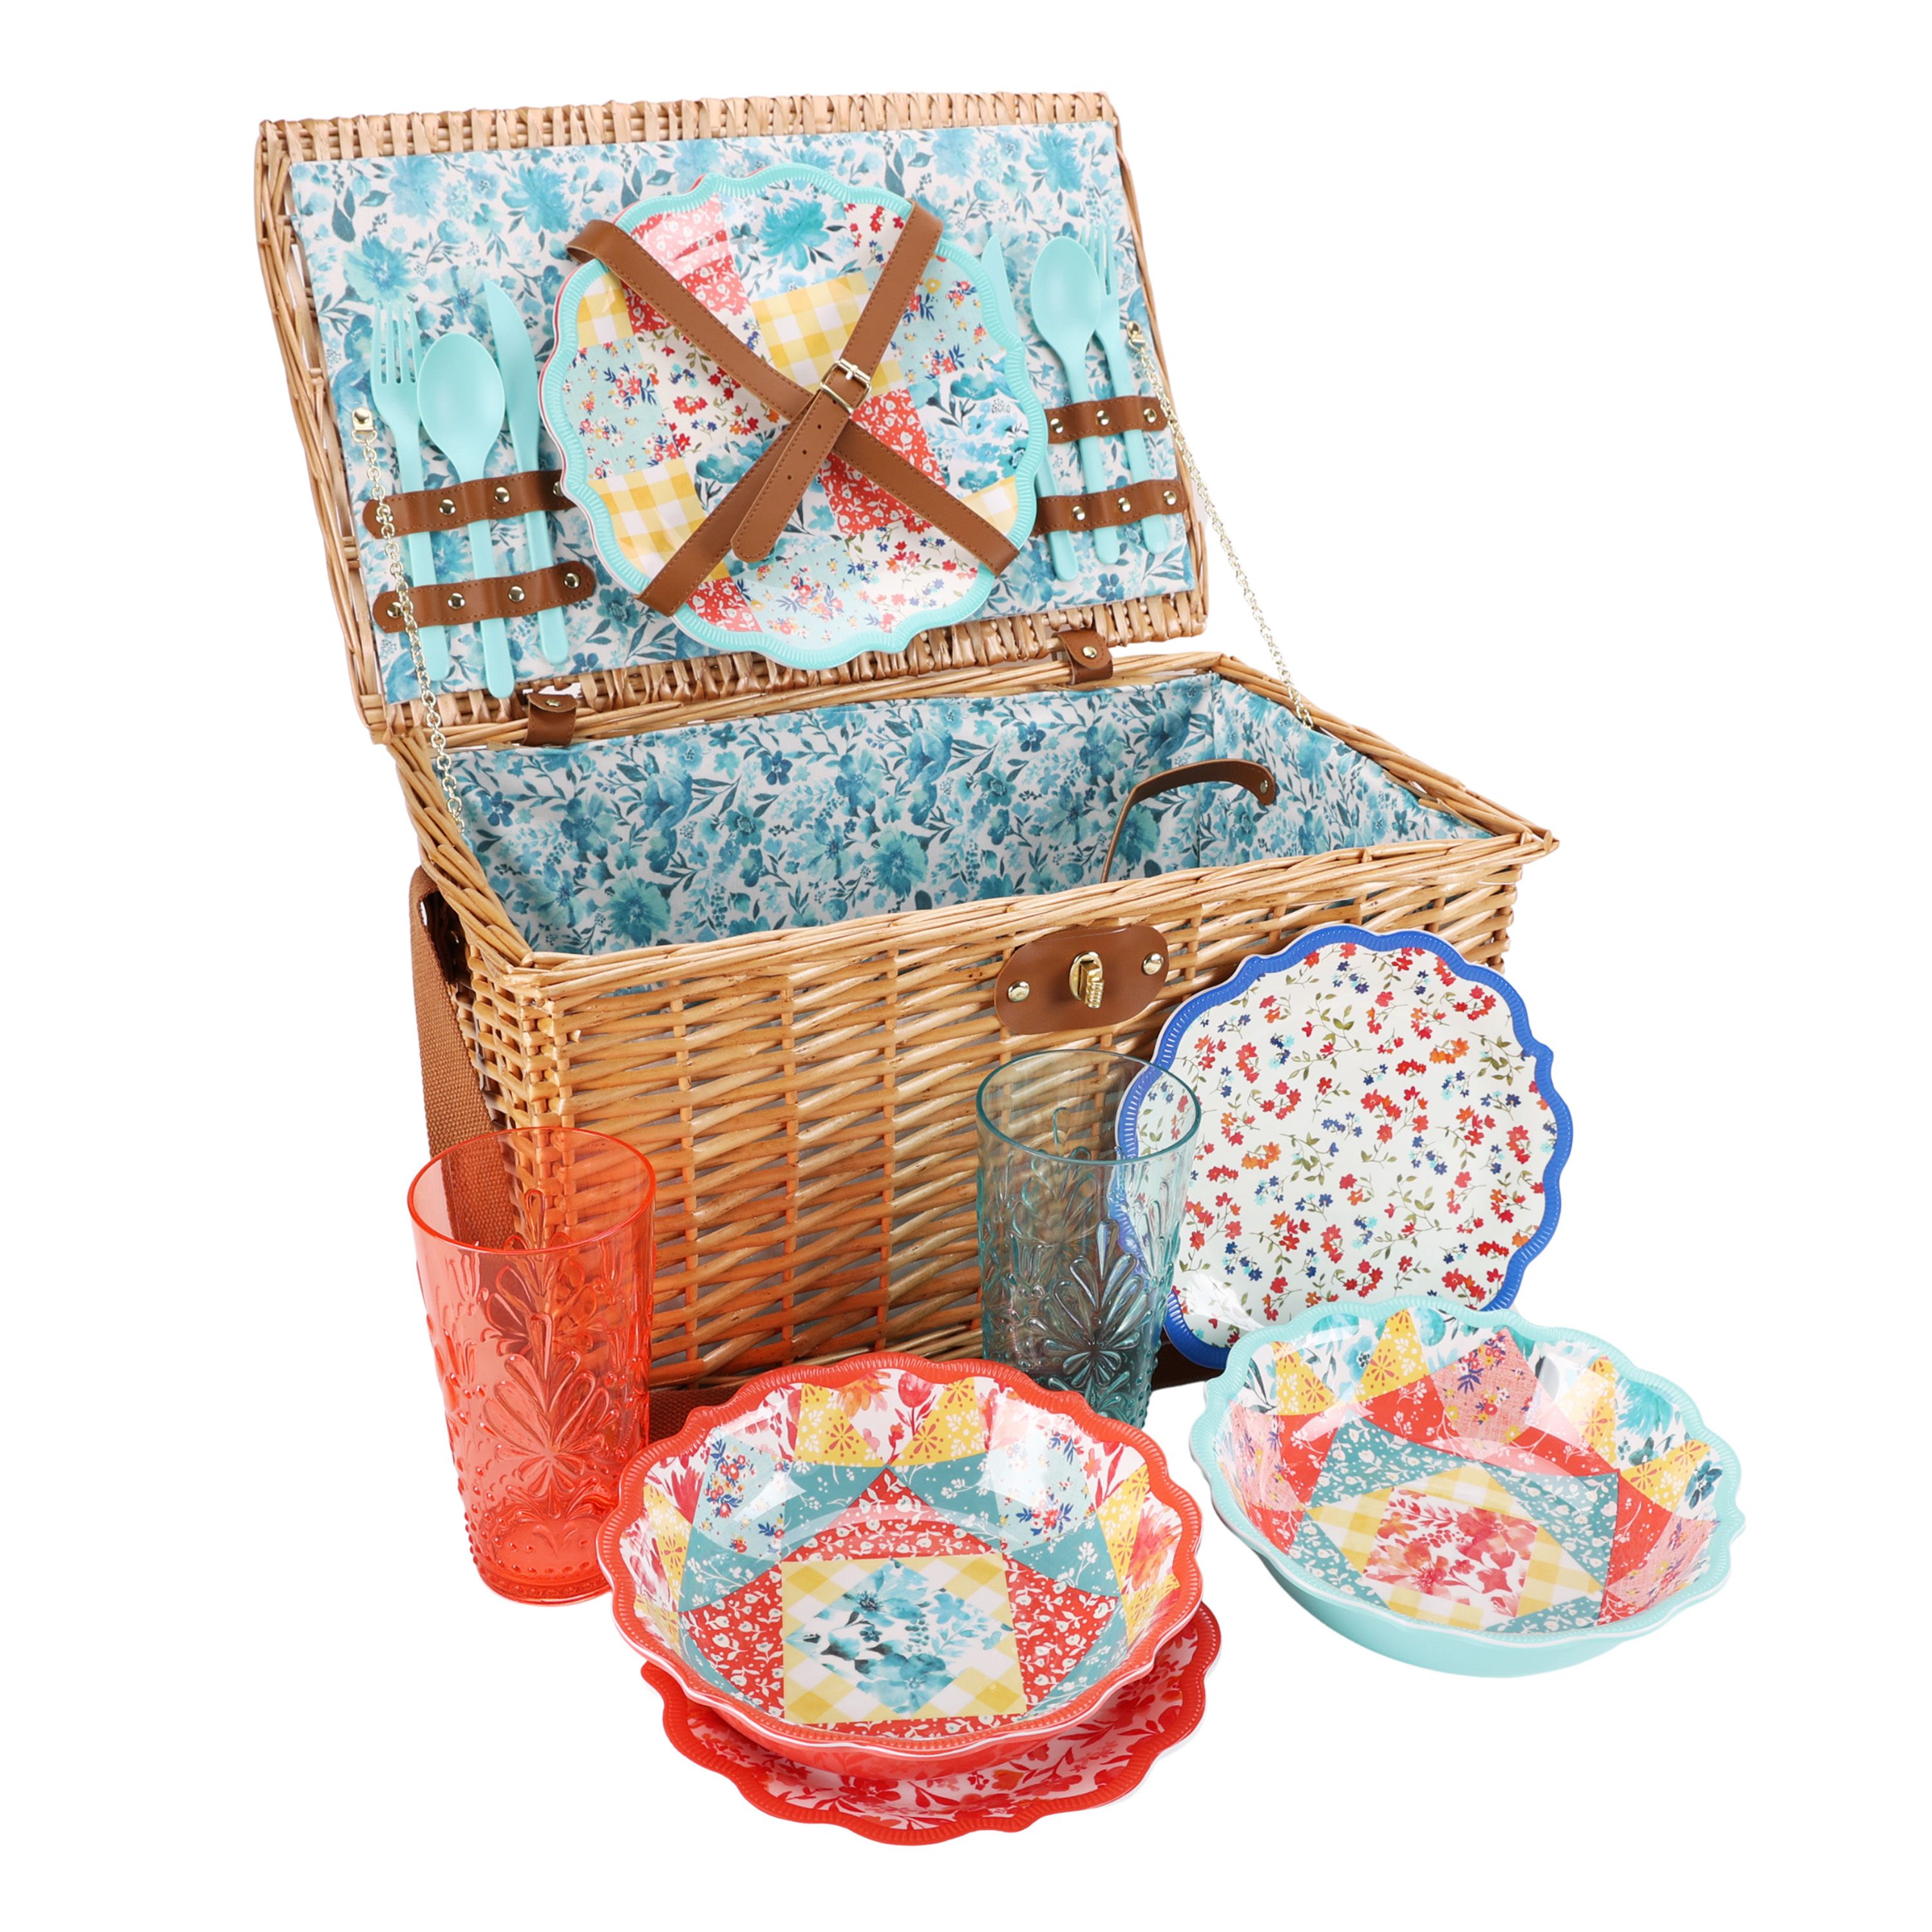 The Pioneer Woman 15-Piece Service for Two Patchwork Medley Picnic Basket Set